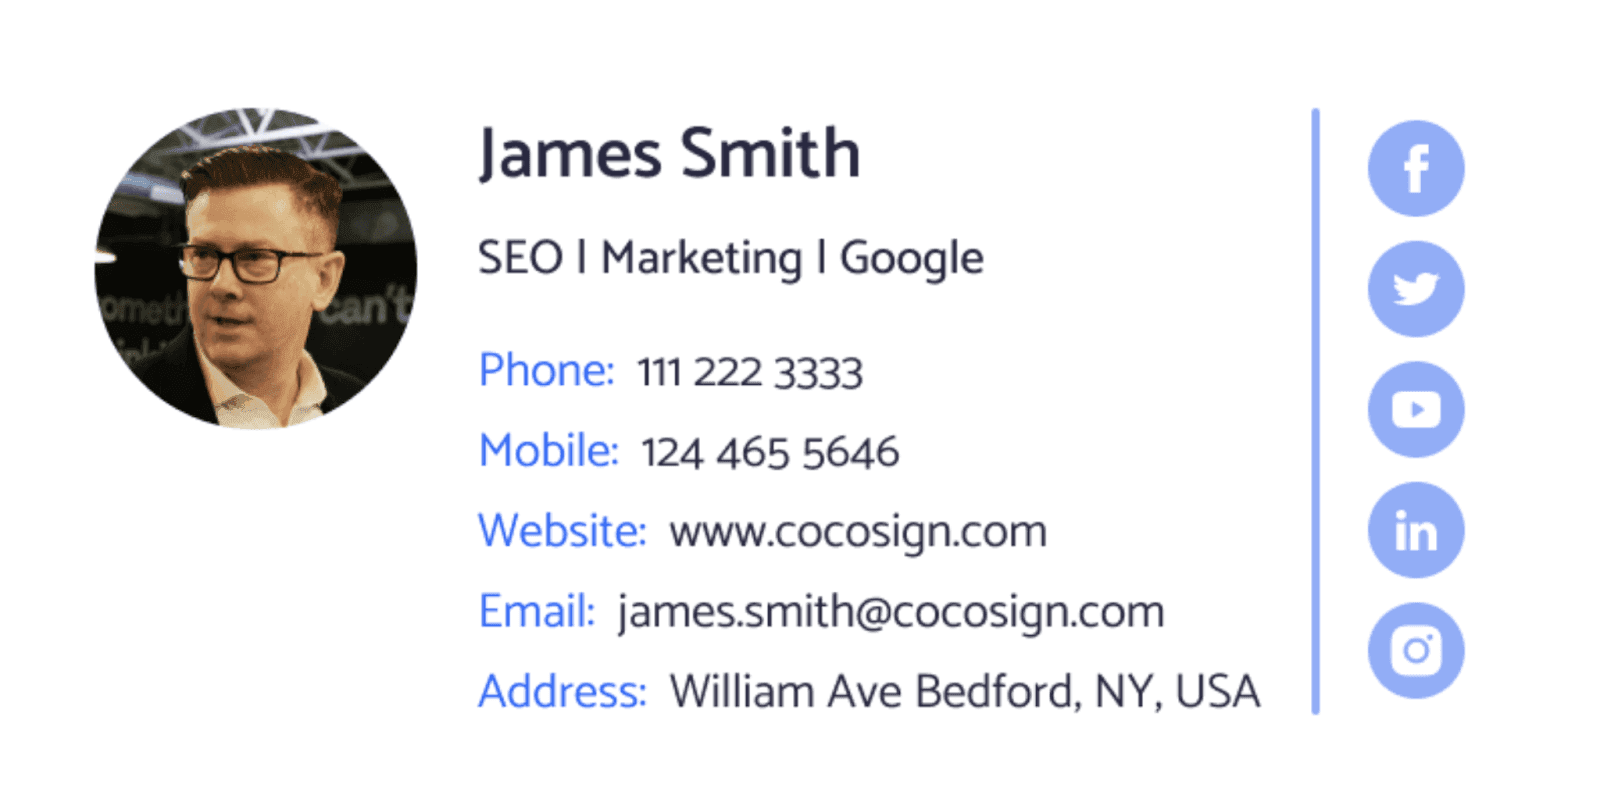 James Smith professional email signature.